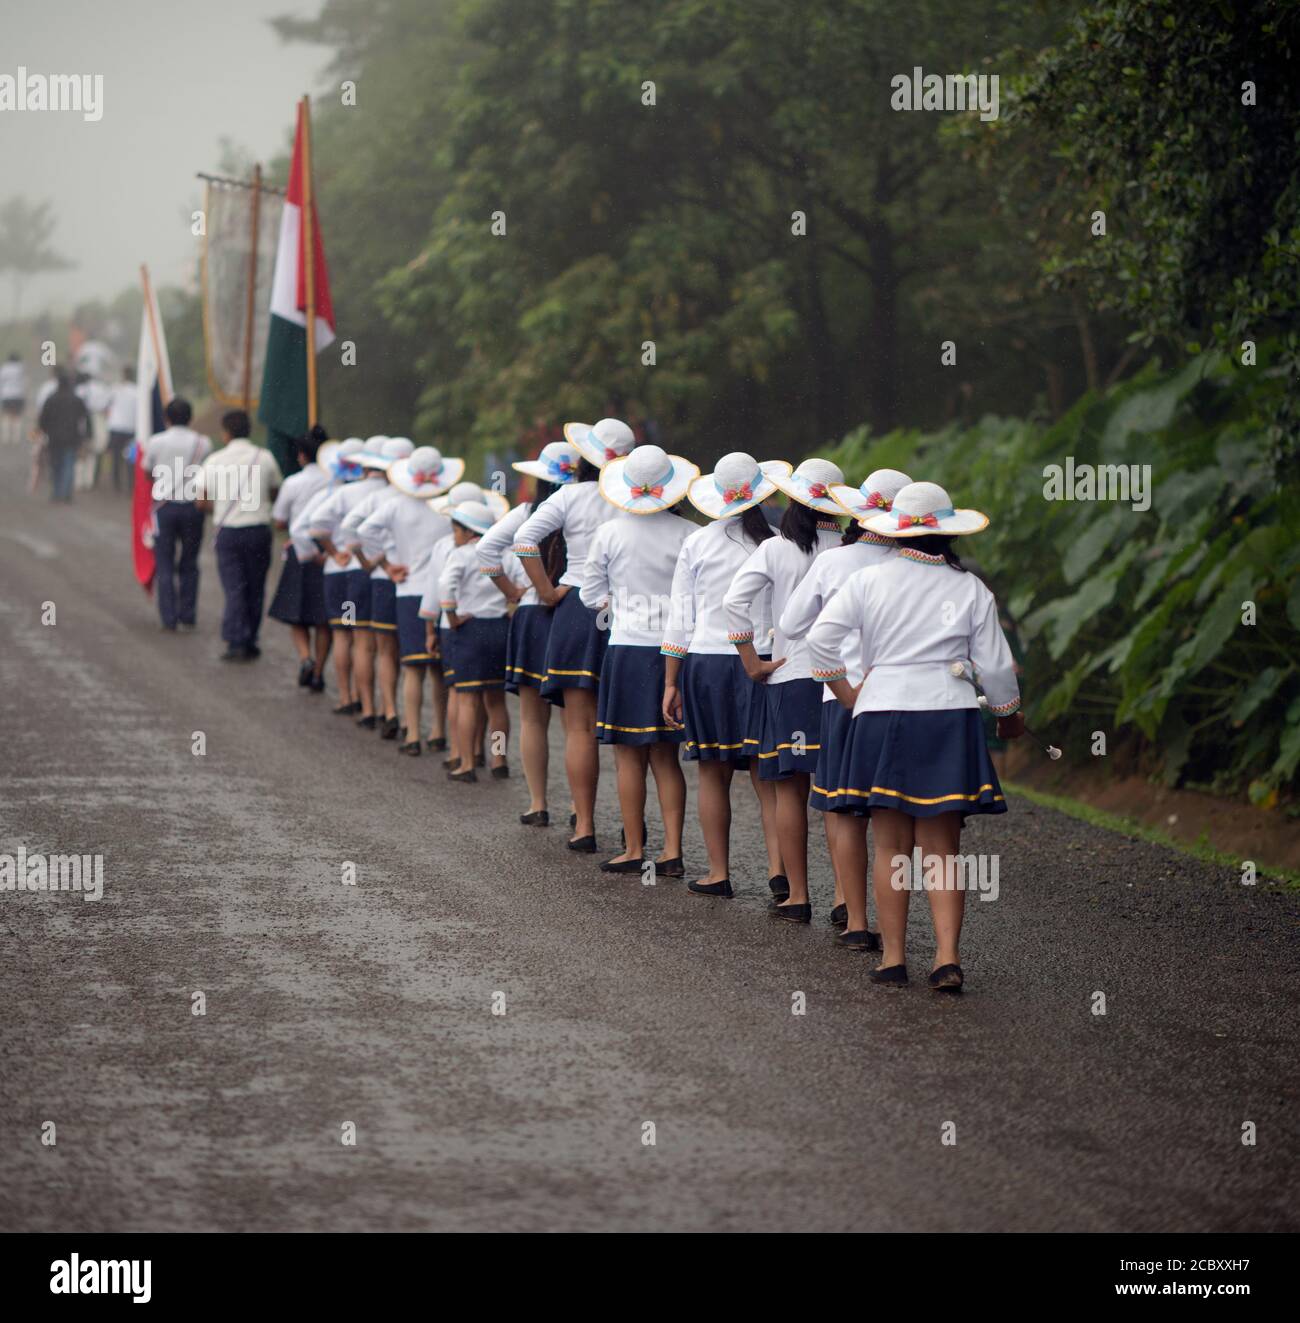 Indigenous children from a marching band parade in Panama's Ngäbe-Bugle comarca. Stock Photo